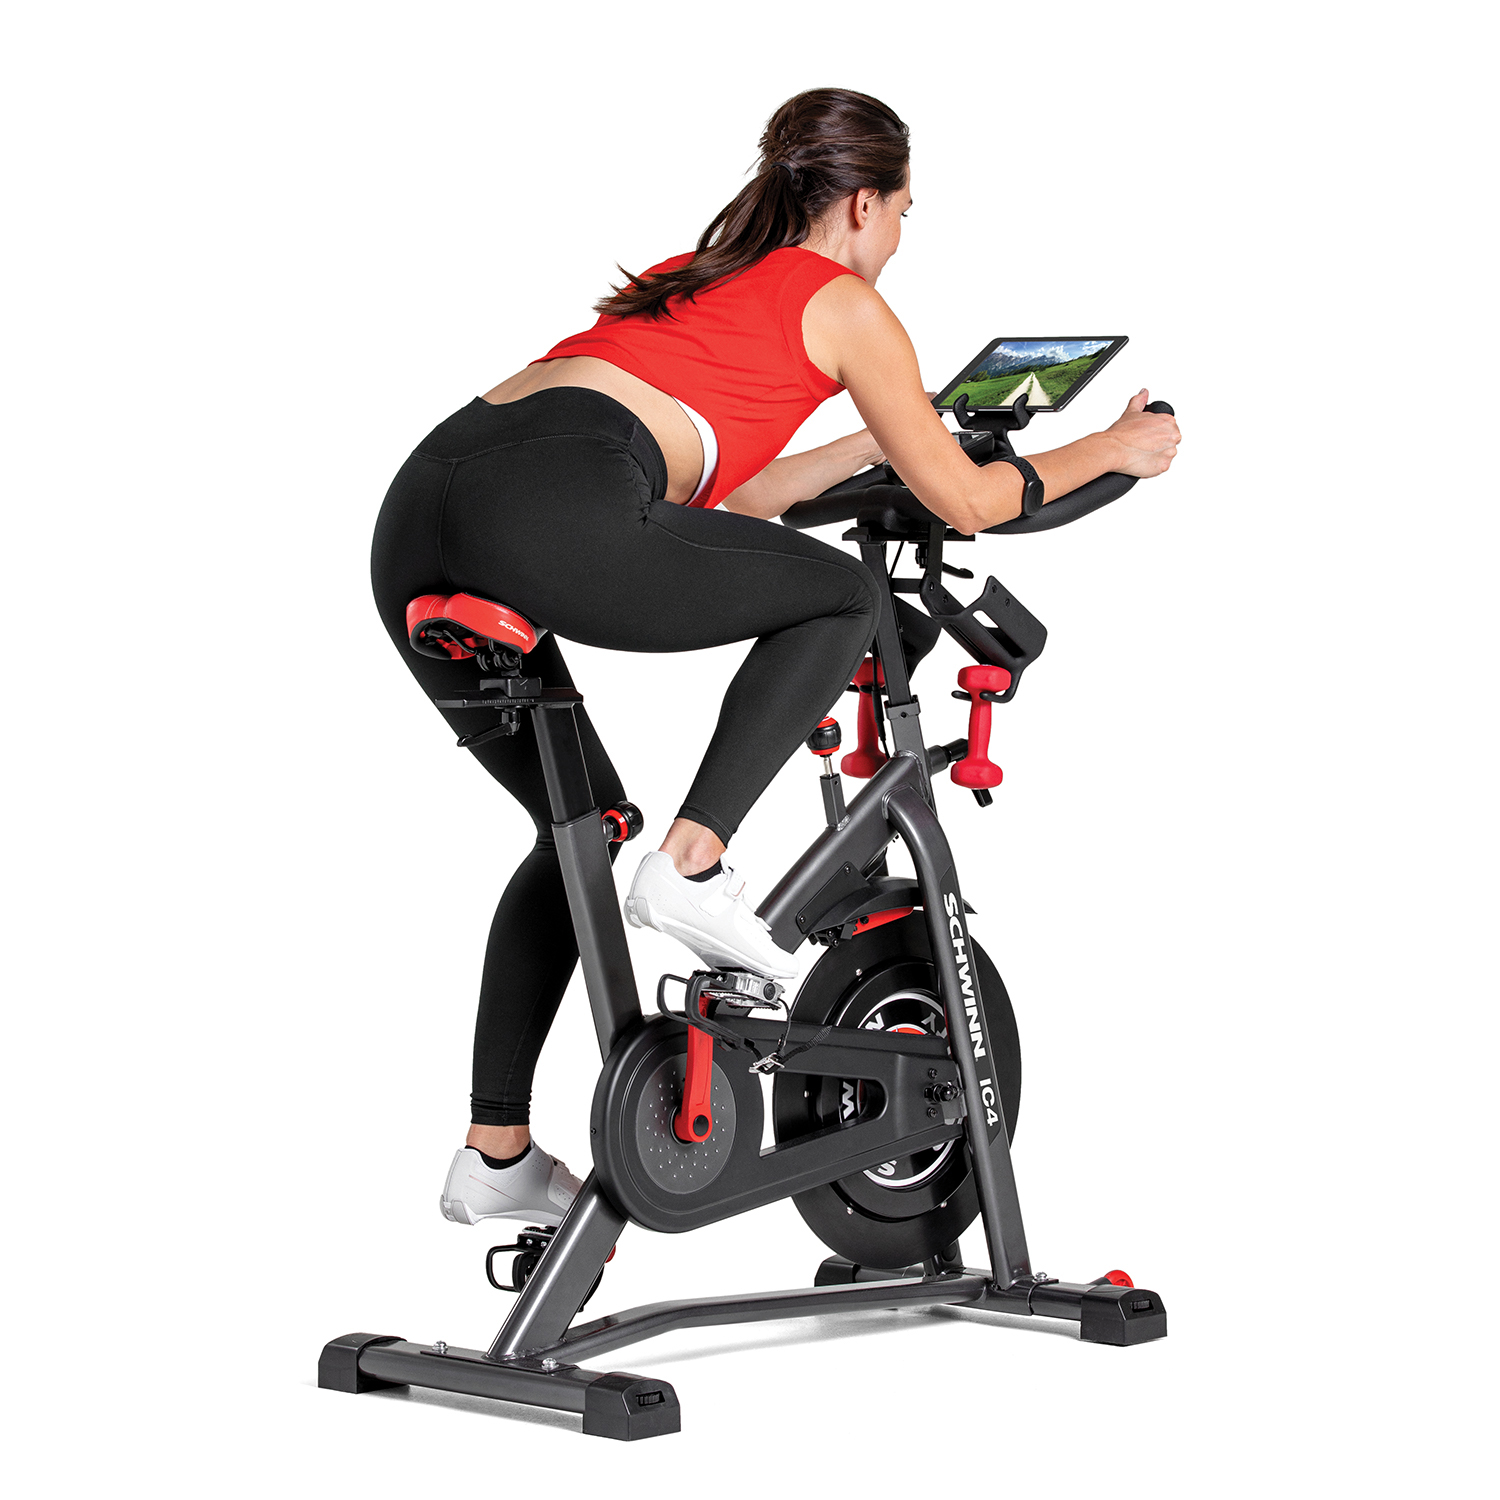 Schwinn Fitness Ic4 Indoor Stationary Exercise Cycling Training Bike